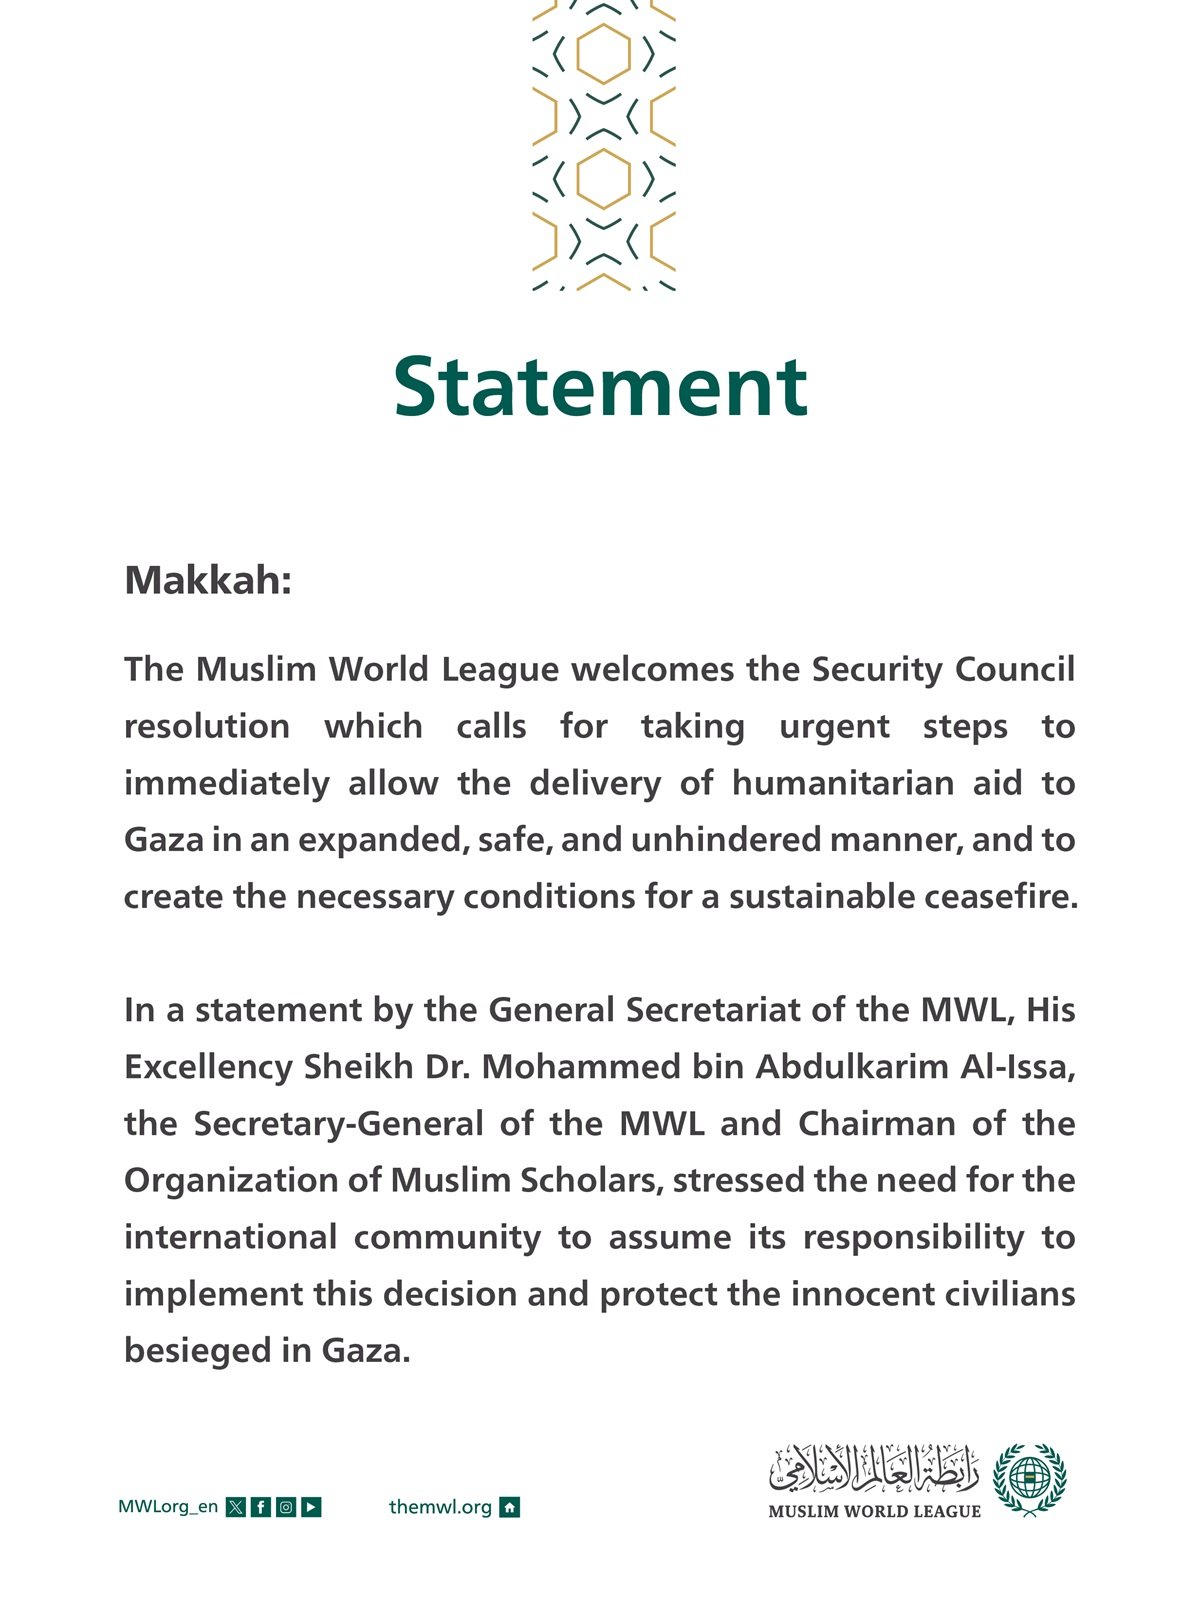 Statement on the Security Council’s Decision to Allow the Delivery of Aids to Gaza  Makkah: The Muslim World League welcomes the Security Council resolution which calls for taking urgent steps to immediately allow the delivery of humanitarian aid to Gaza in an expanded, safe, and unhindered manner, and to create the necessary conditions for a sustainable ceasefire.  In a statement by the General Secretariat of the MWL, His Excellency Sheikh Dr. Mohammed bin Abdulkarim Al-Issa, the Secretary-General